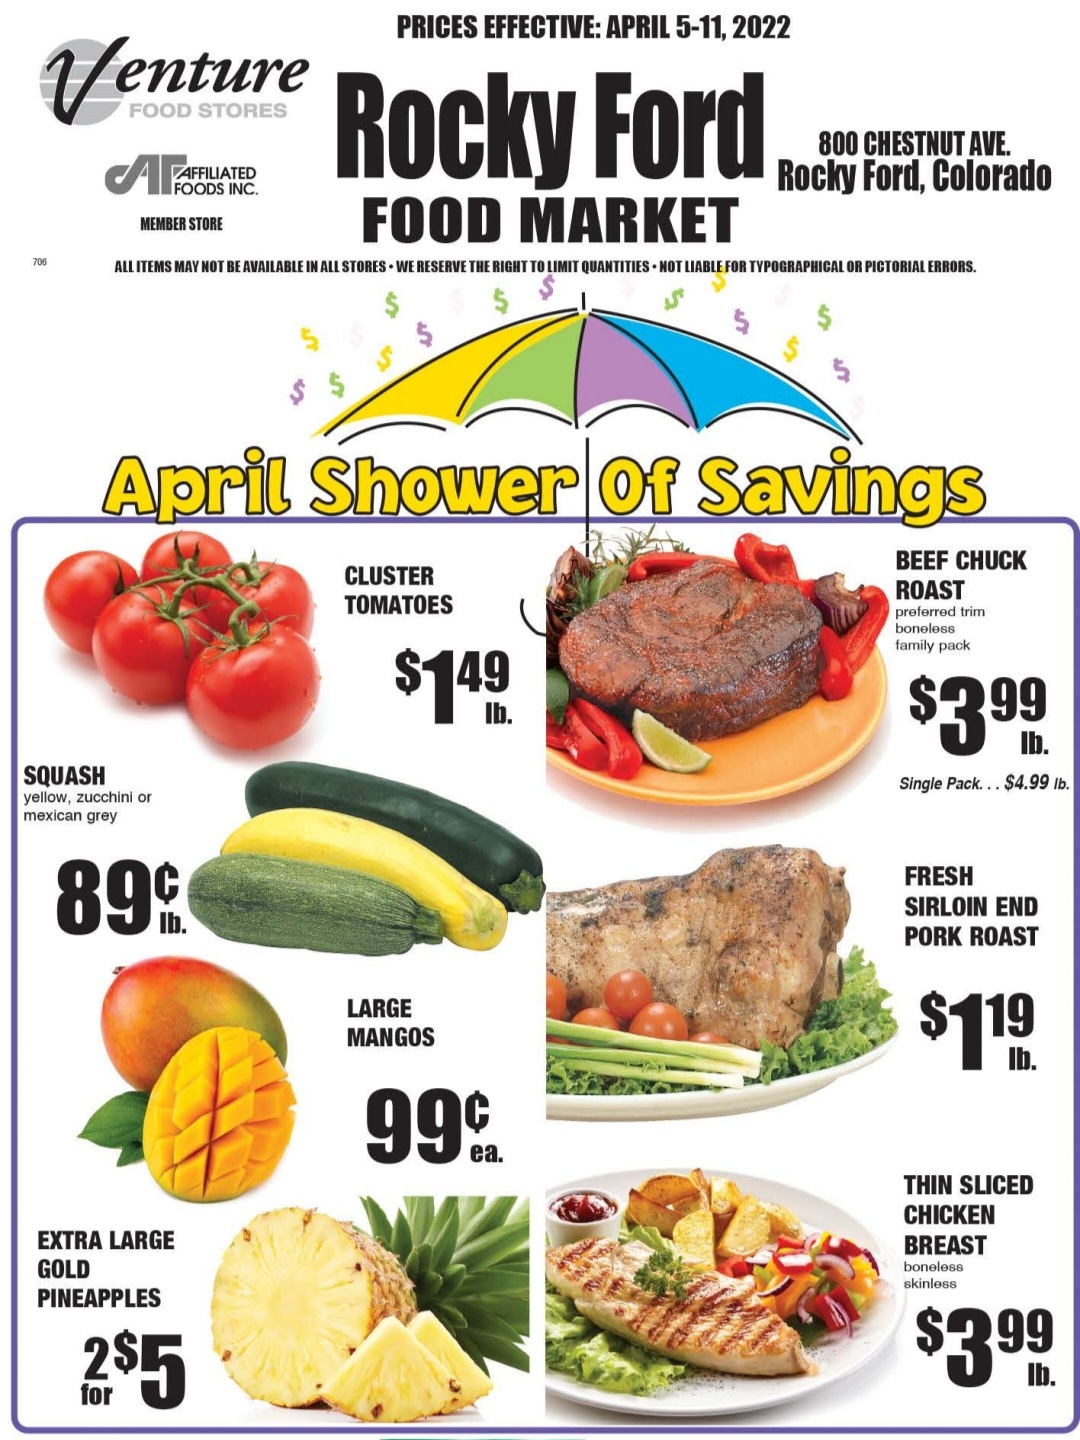 Rocky Ford Food Market April 2022 SECO News seconews.org